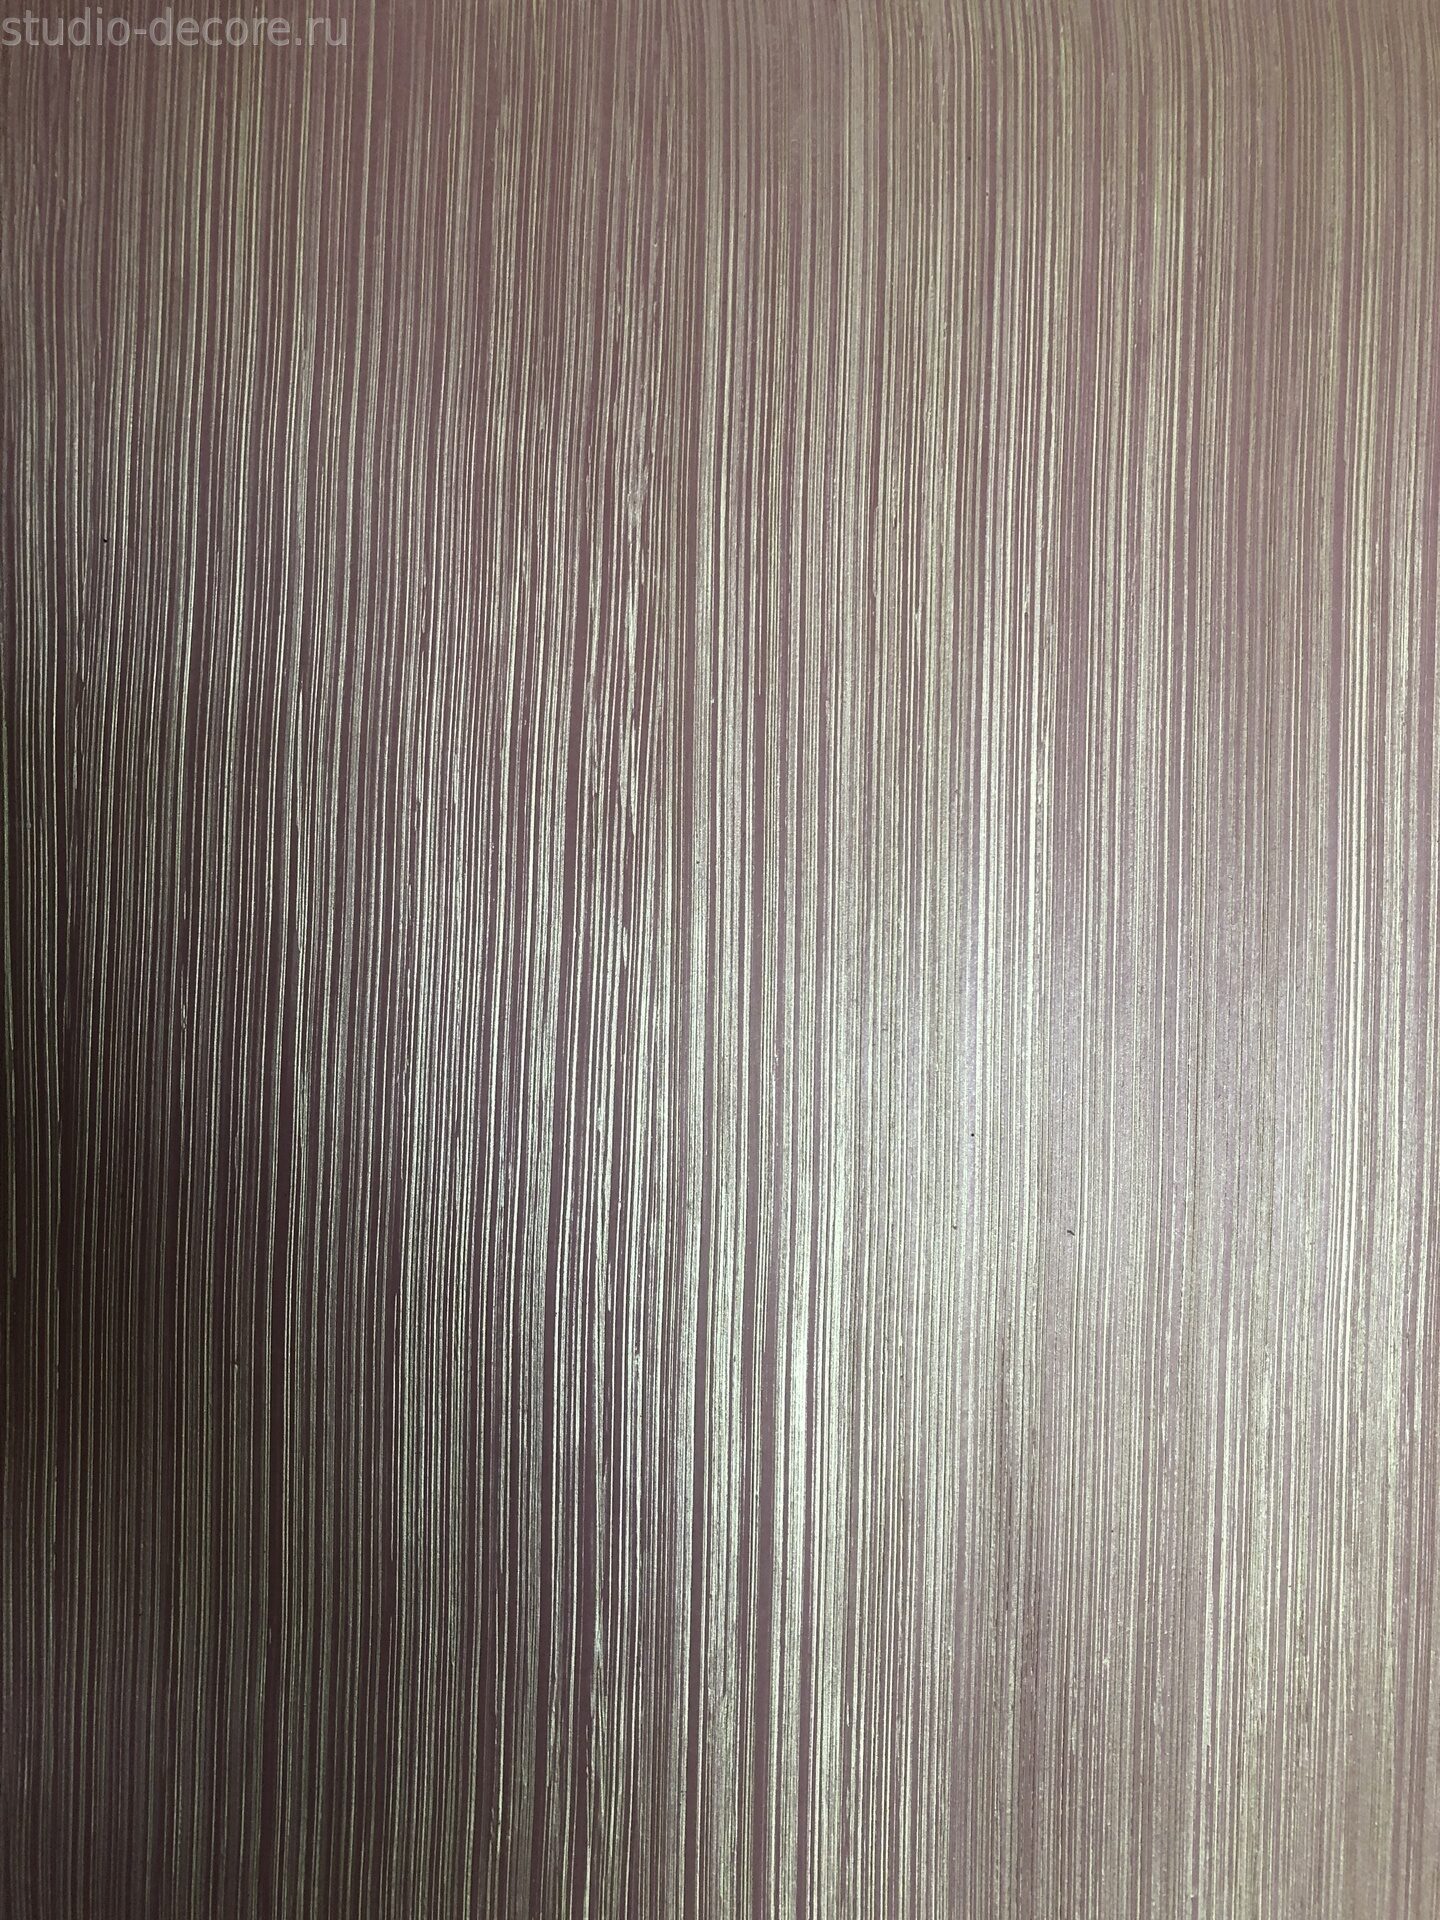 Plaster painted wall texture seamless 06932